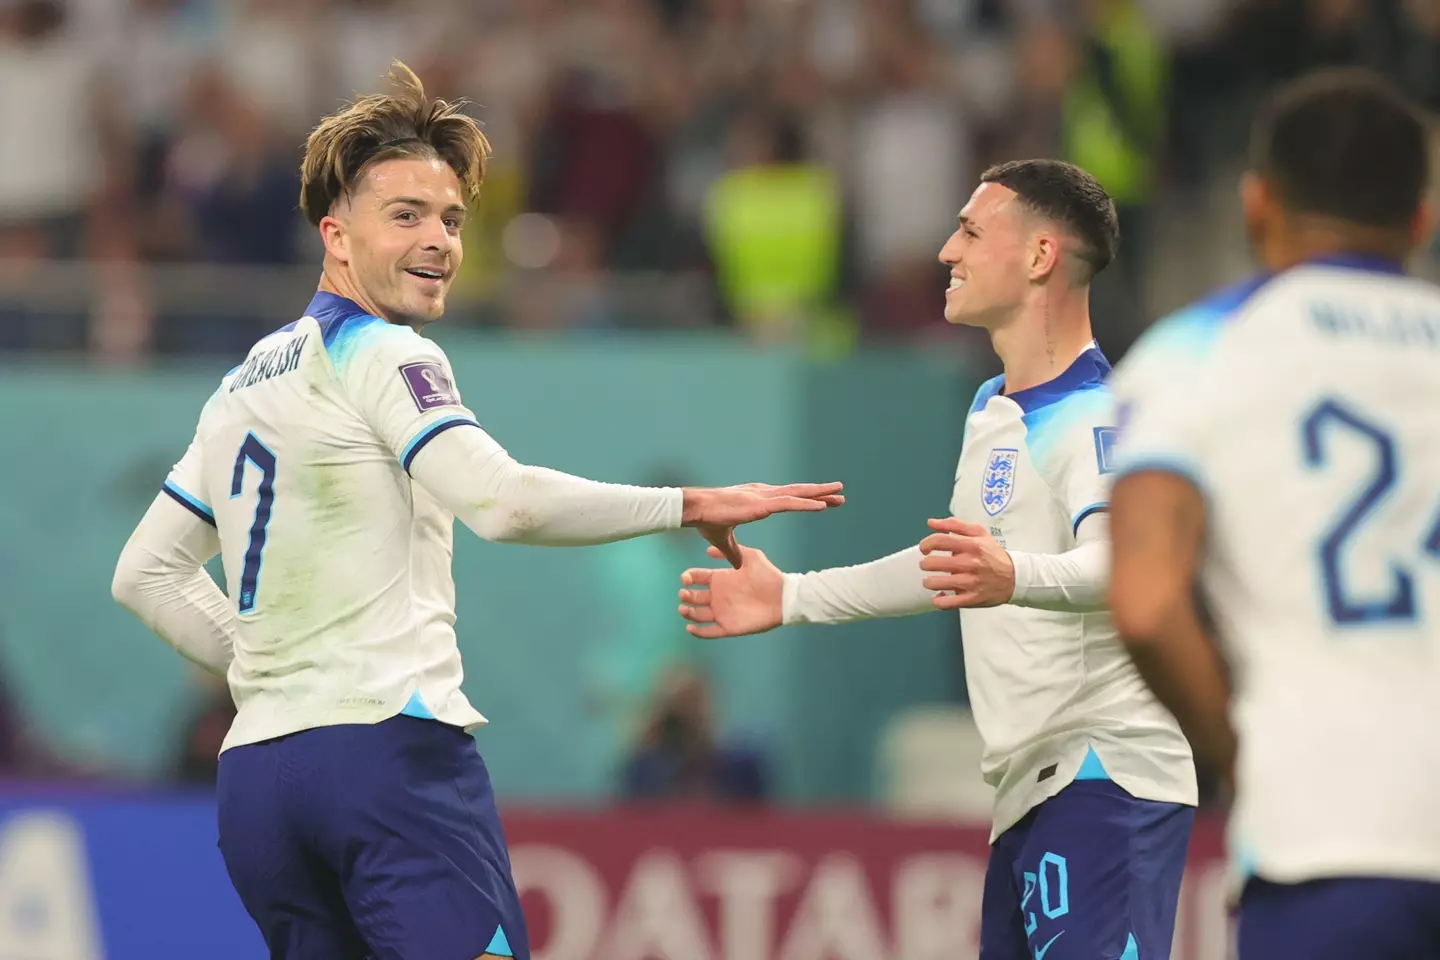 Grealish and Foden celebrate the former's goal against Iran. (Image